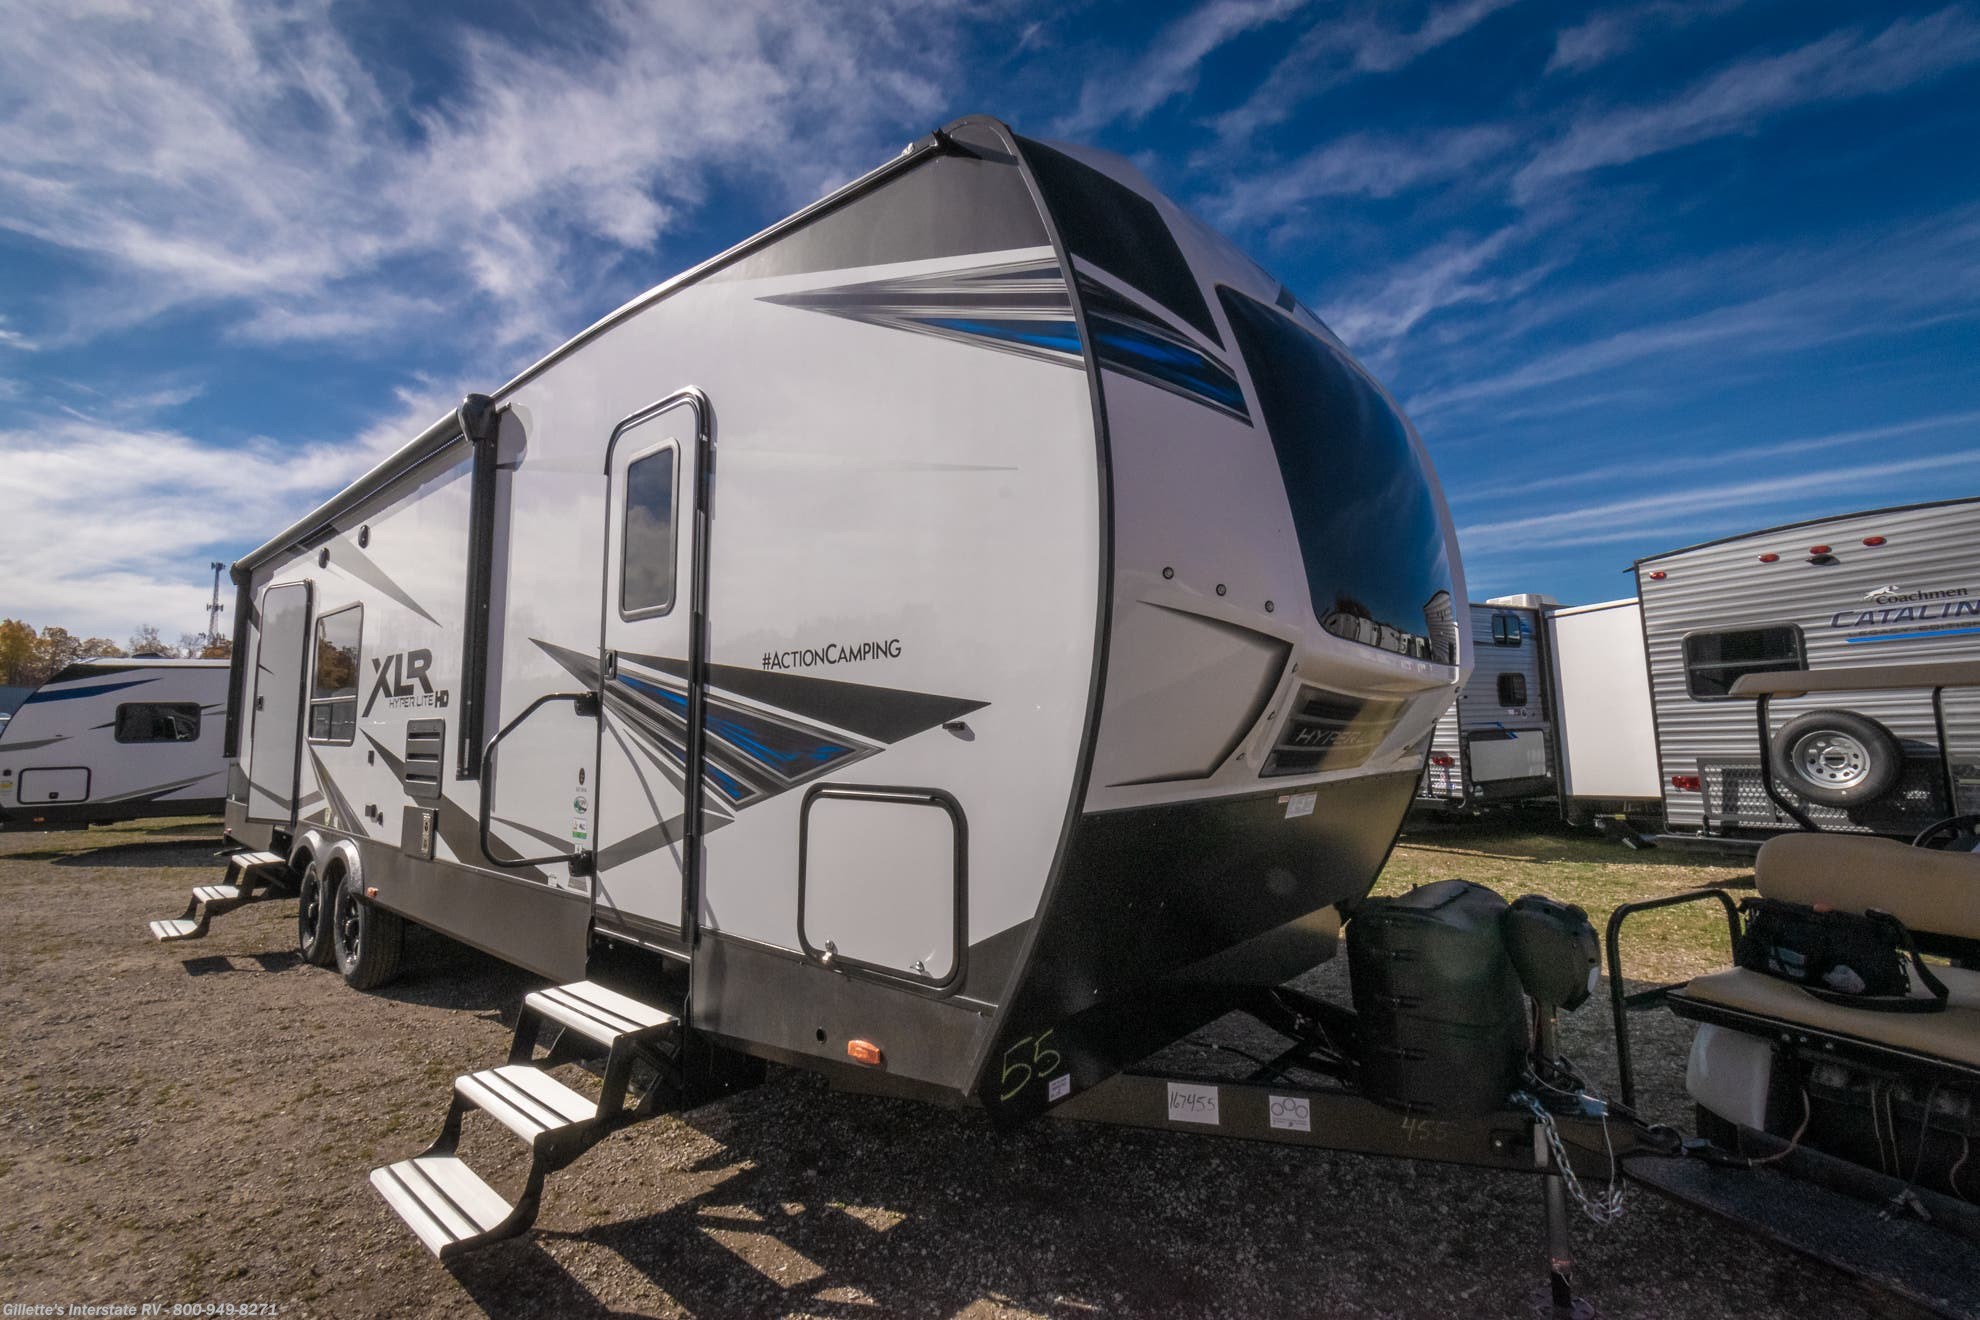 2021 Forest River XLR Hyperlite 3016 RV for Sale in East Lansing, MI 48823 | 13788 | RVUSA.com 2021 Forest River Xlr Hyperlite 3016 Specs